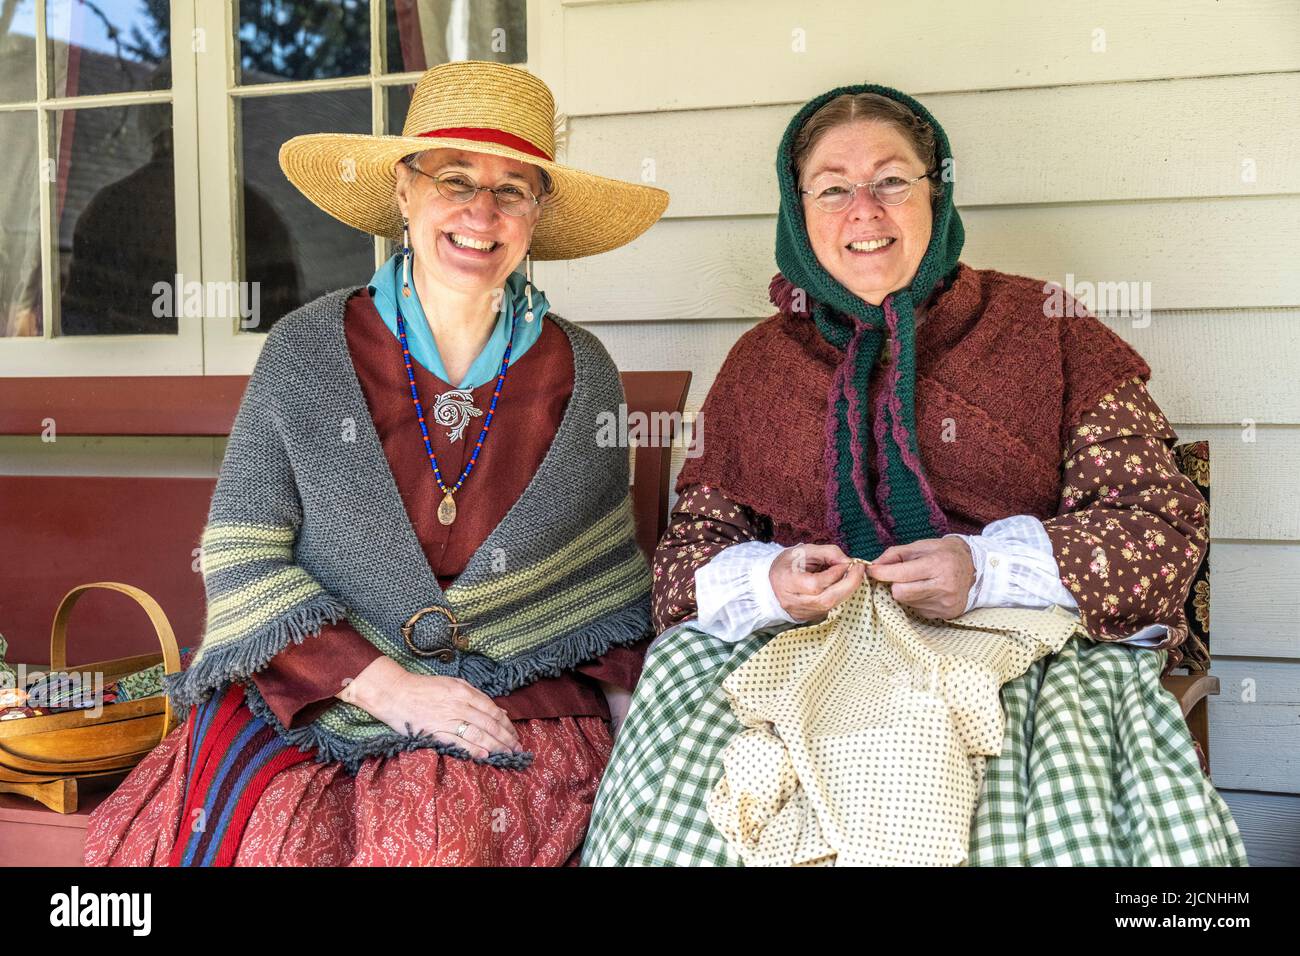 two women wearing authentic replica clothes from the 1850's at Fort Nisqually in Tacoma, Washington Stock Photo